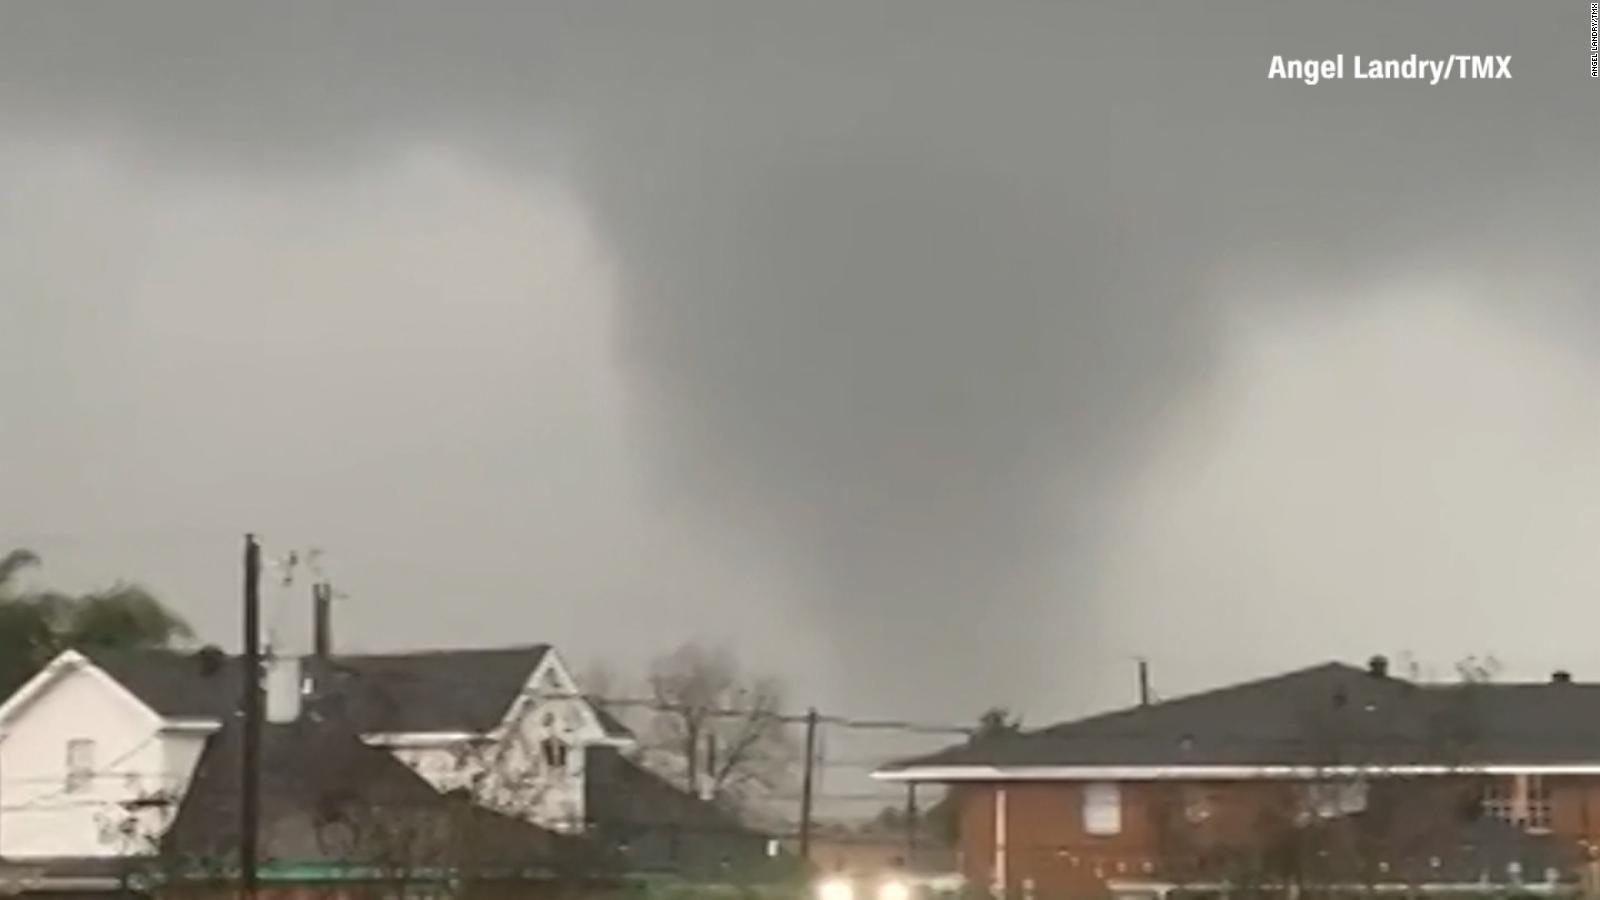 Millions are at risk from tornadoes in the South, with the storm threatening the Midwest